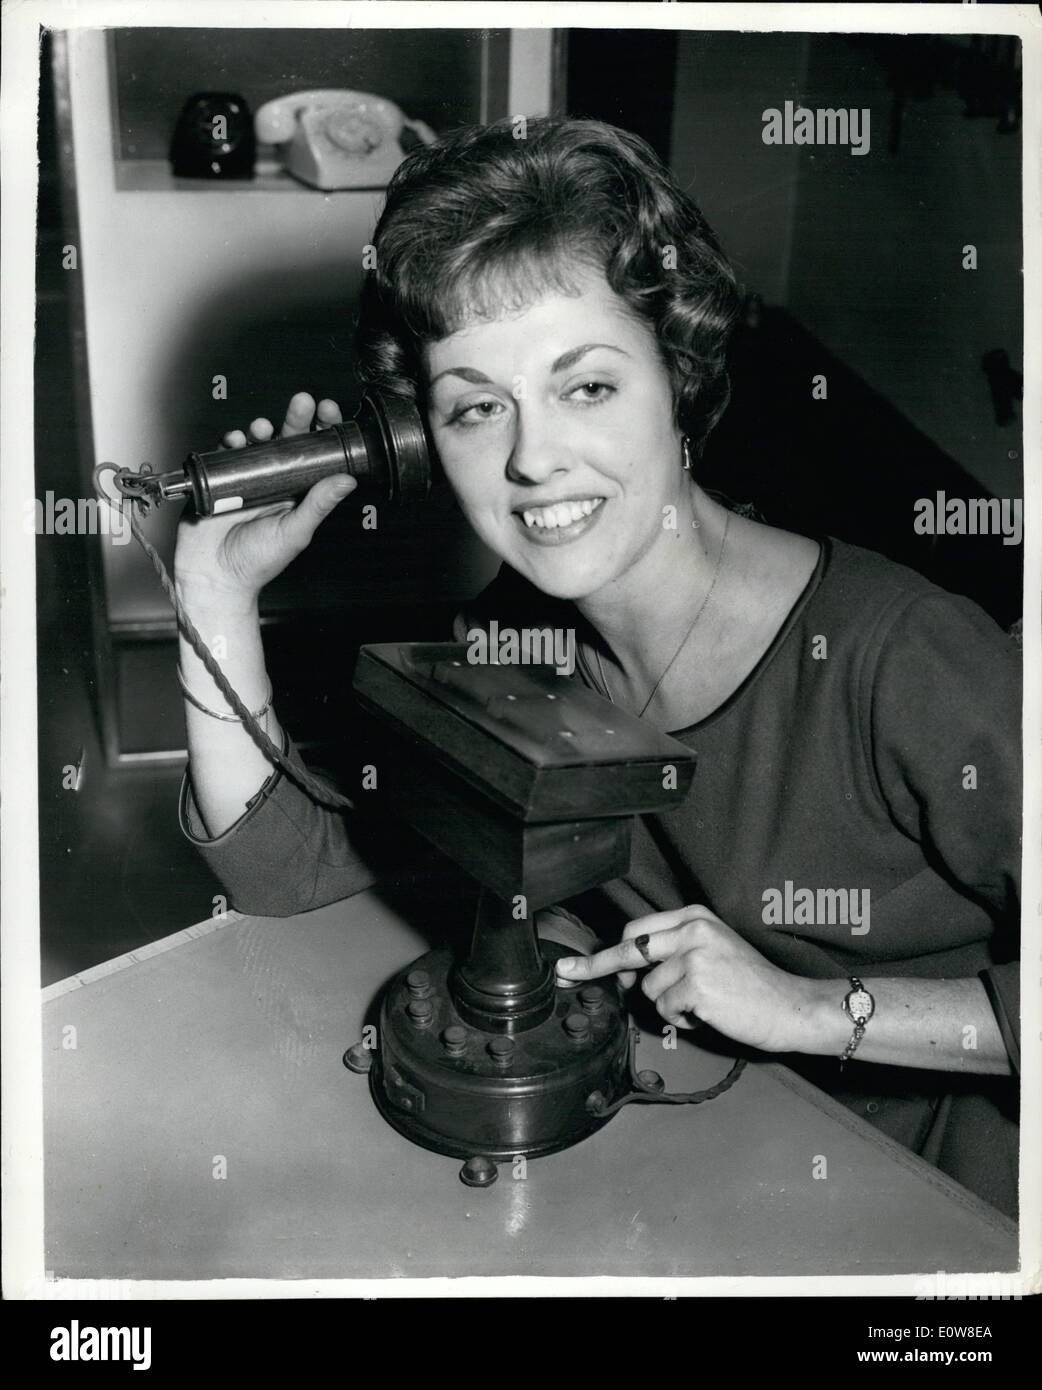 Nov. 11, 1961 - Historical telephone Equipment on show in London. A permanent exhibition of historical telephone equipment was opened this morning at Fleet Building, Farrington Street. The exhibition illustrates the progress in telephonic equipment through the ages. Keystone Photo Shows: Audrie Cooper of Lewisham with the oldest telephone in the exhibition. It the French ADER telephone with carbon pencil transmitter. The wooden diaphragm has been replaced by a platic one to show the carbon pencil. Stock Photo